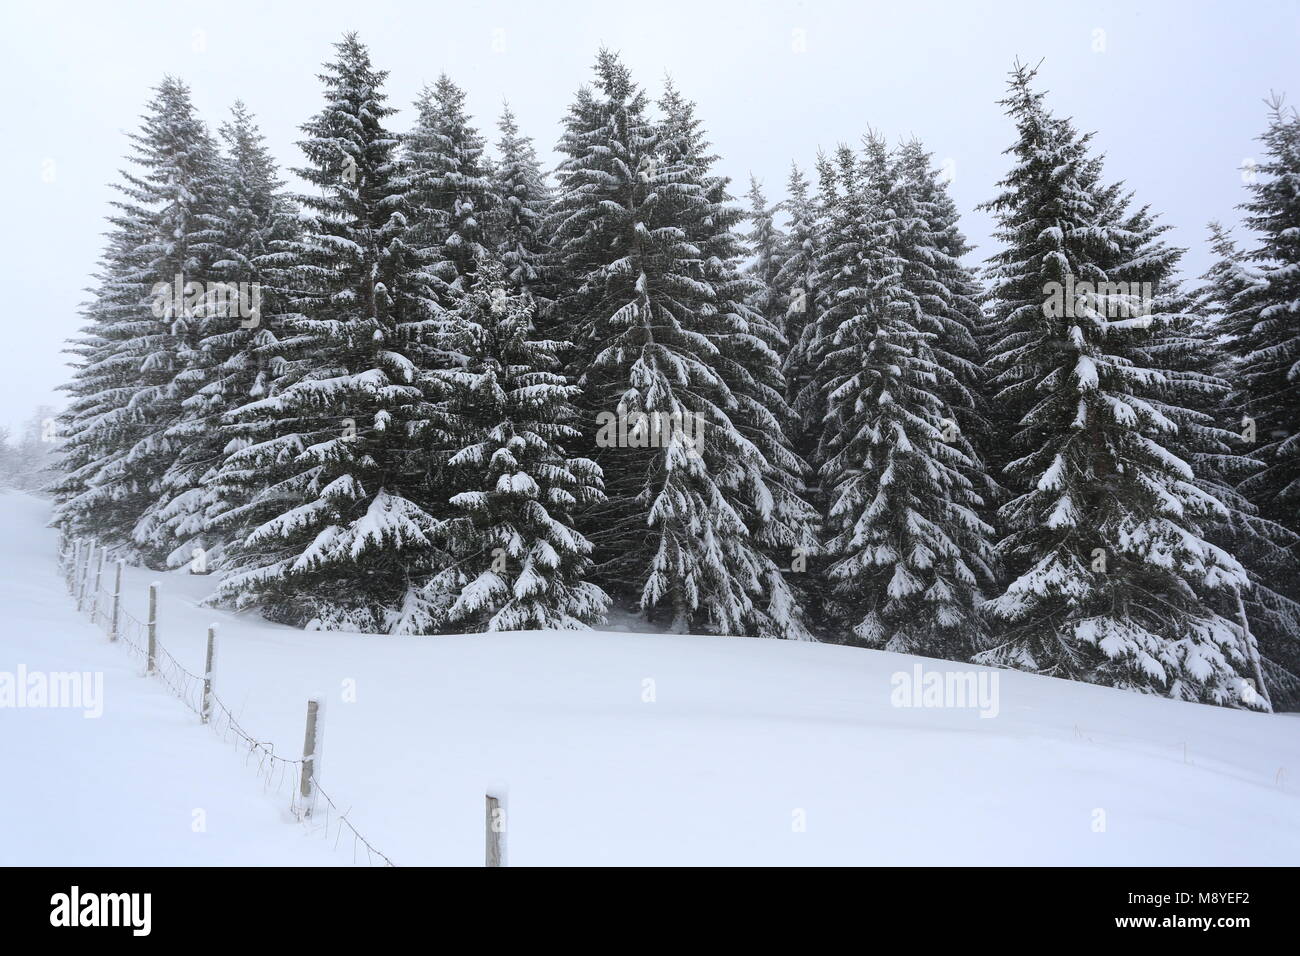 Spruce Trees, New Snow, Fence Stock Photo